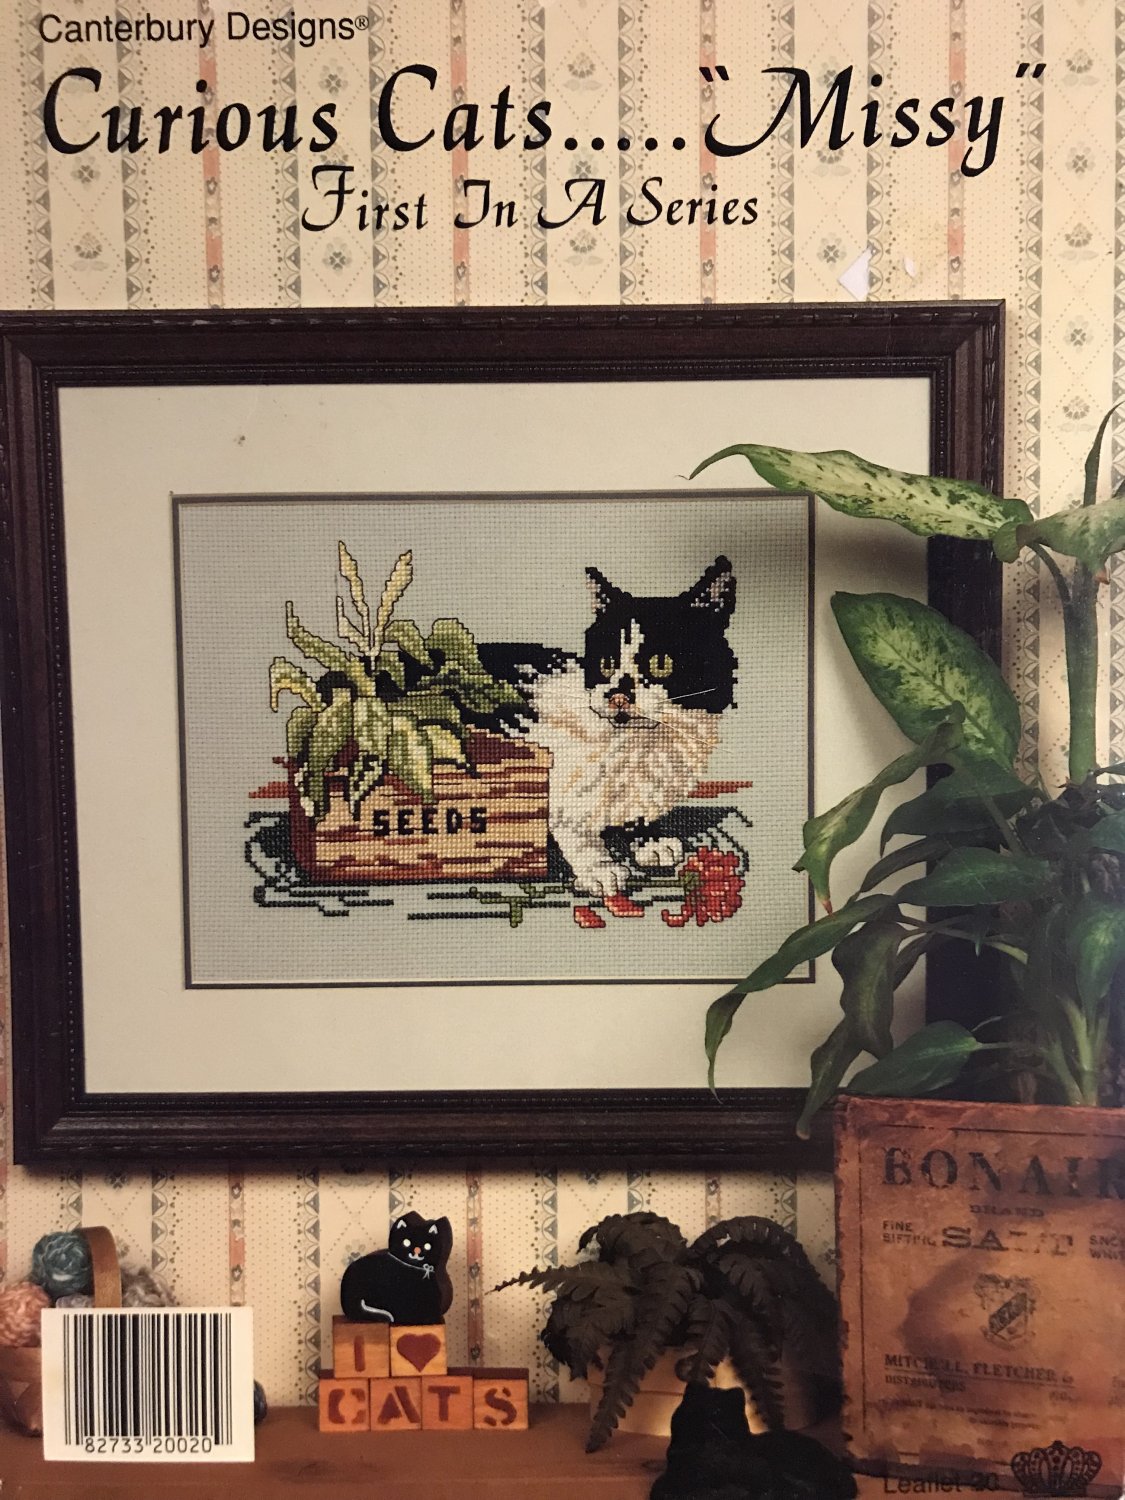 Curious Cats Cross Stitch Chart Cantebury Designs Leaflet First in a Series